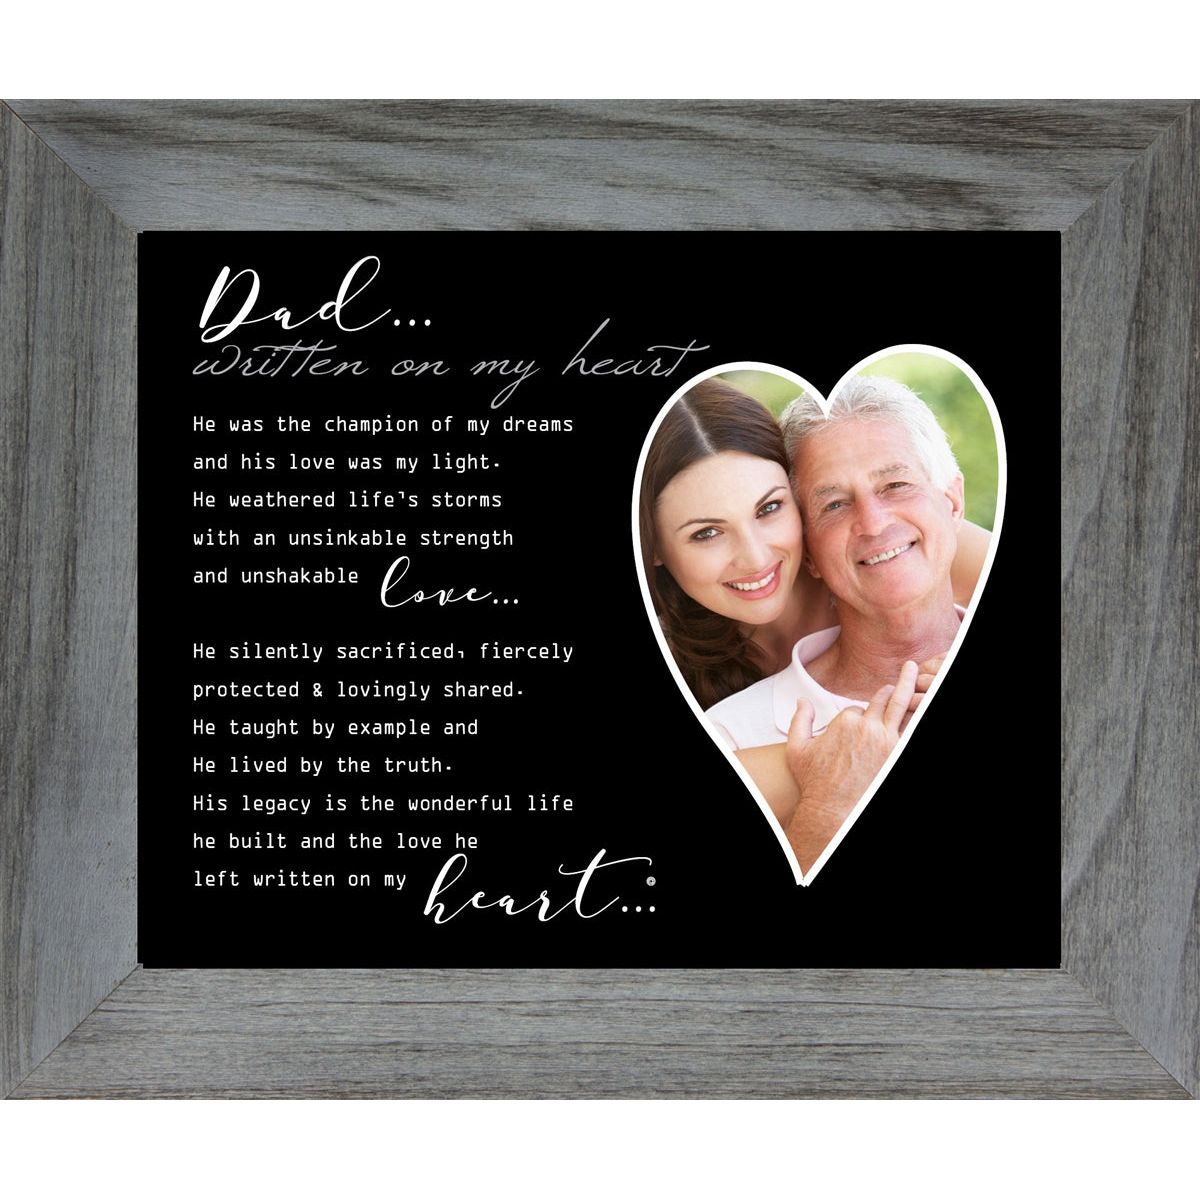 8x10 Distressed Gray wood frame with &quot; Dad... Written on My Heart&quot;  poem and an heart shaped opening for a photograph.